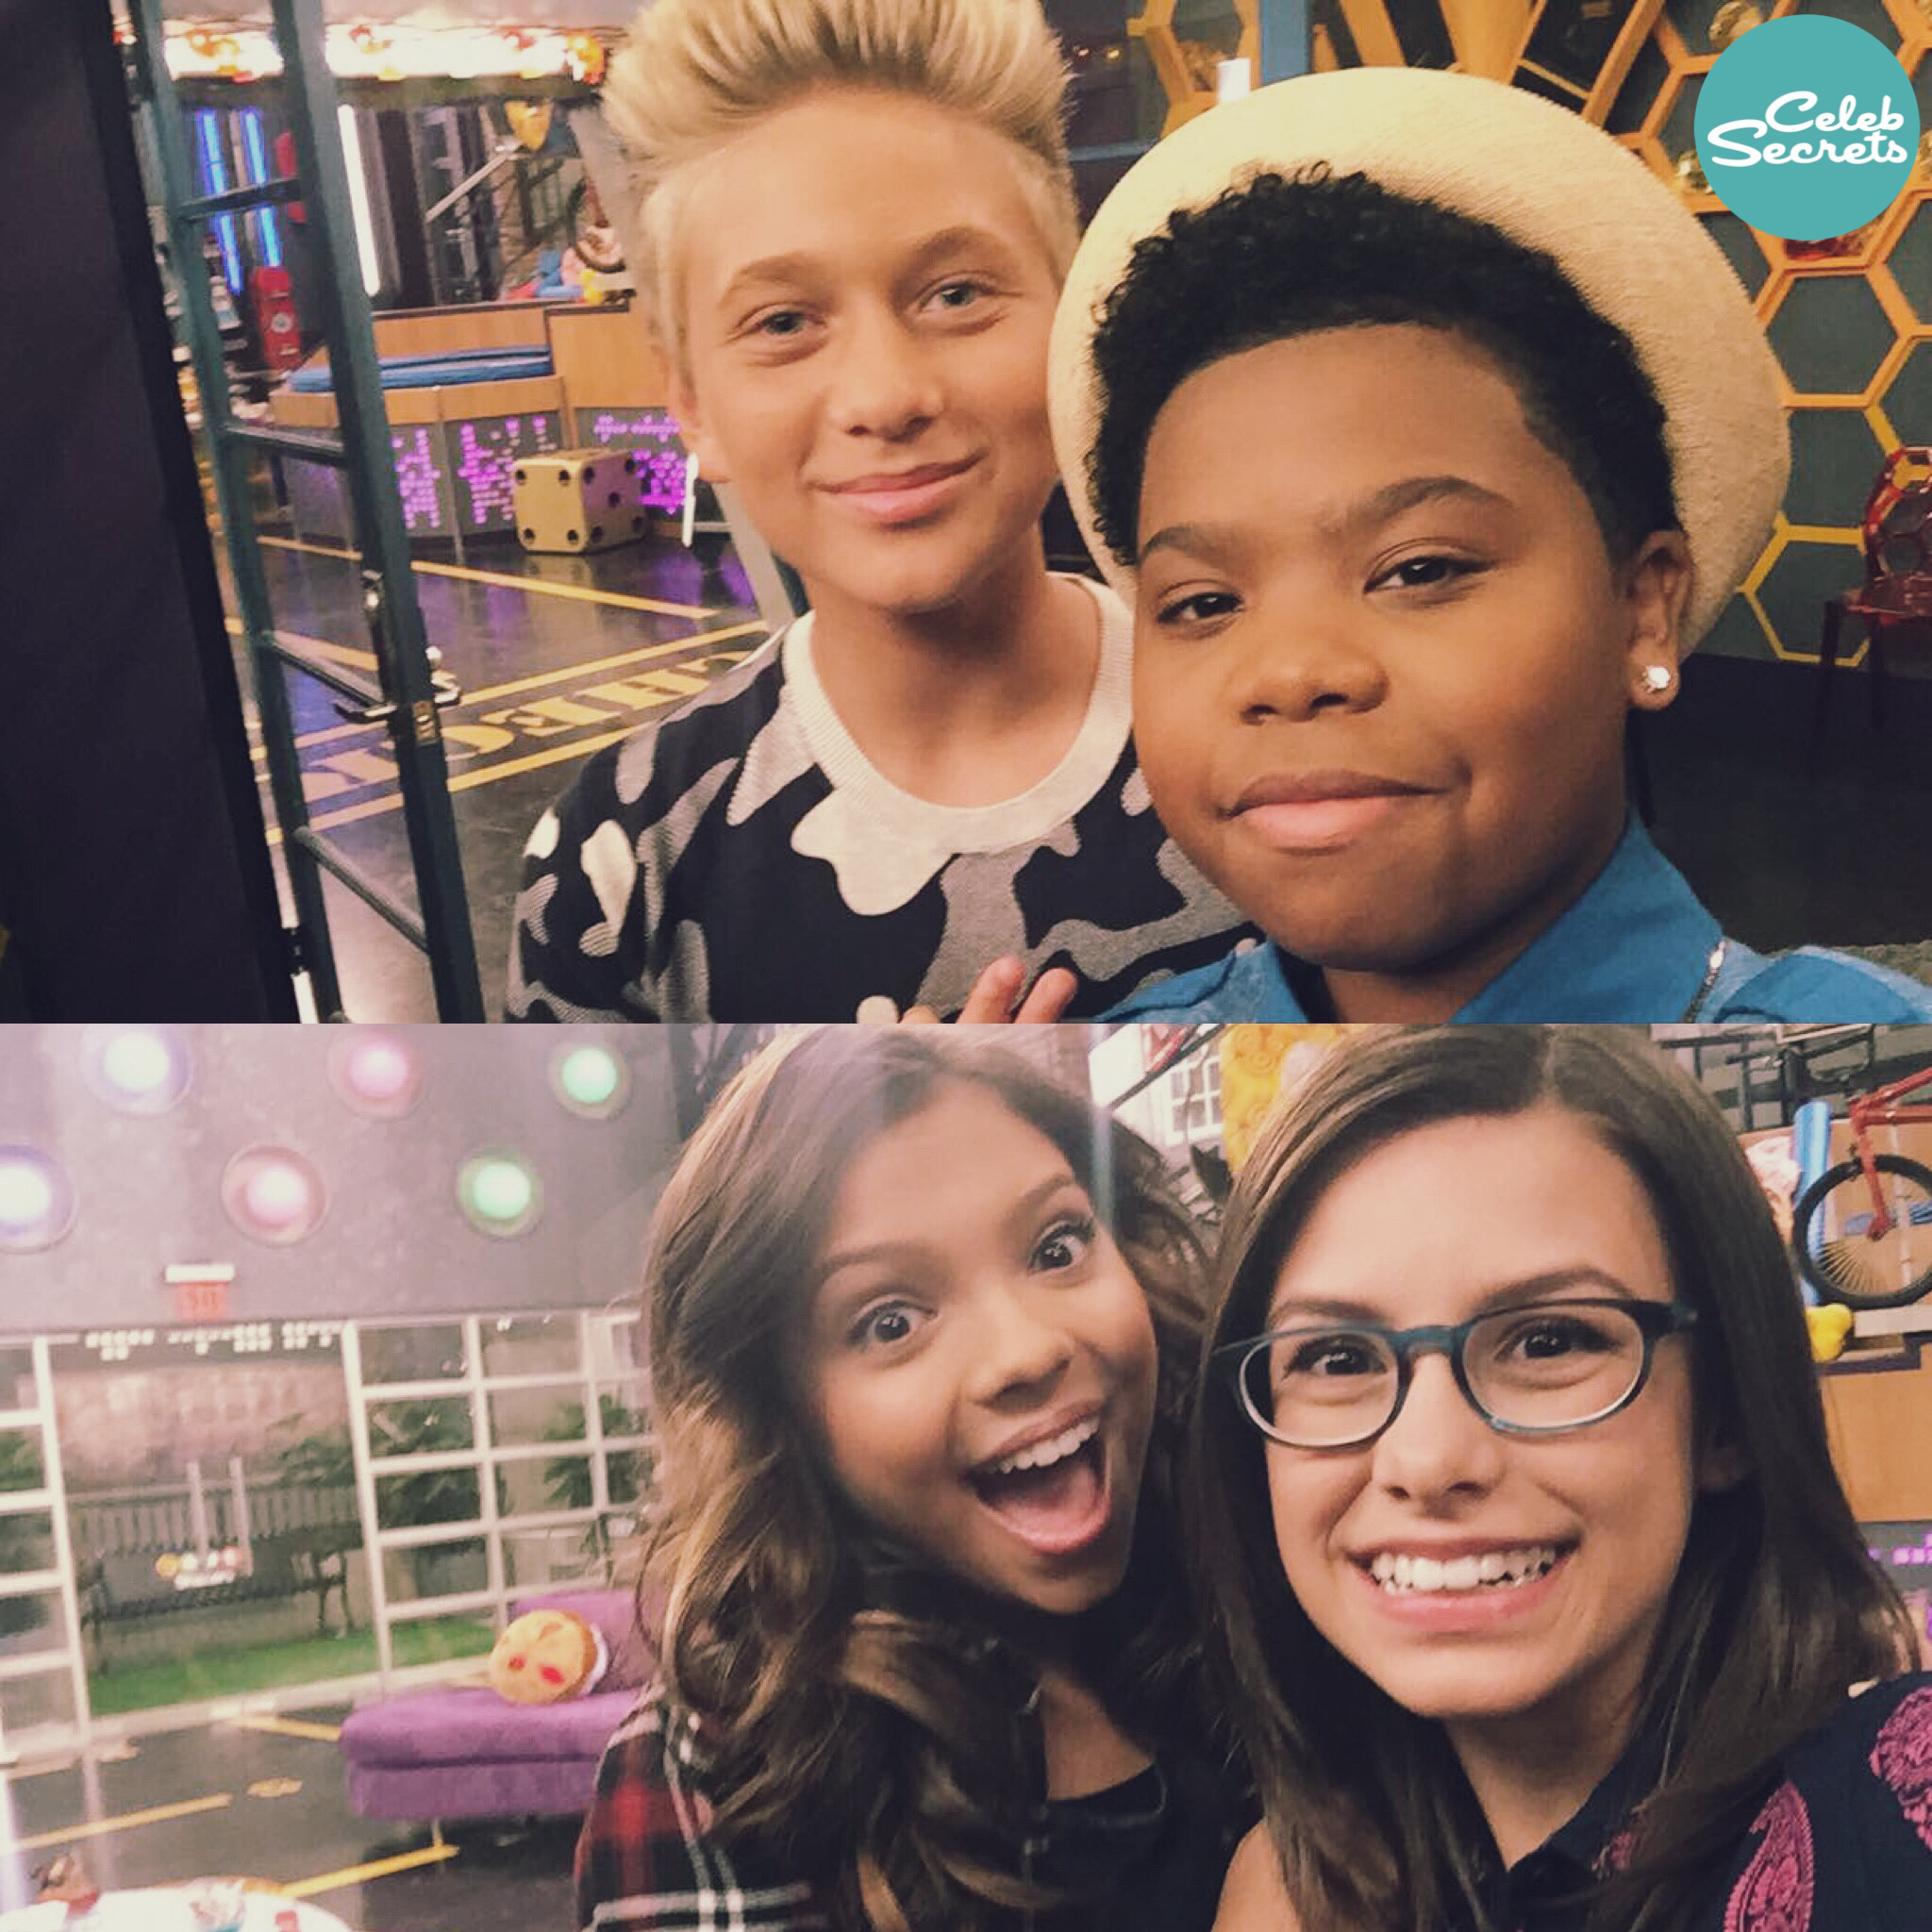 Watch Game Shakers Season 2 Episode 20: Babe Gets Crushed - Full